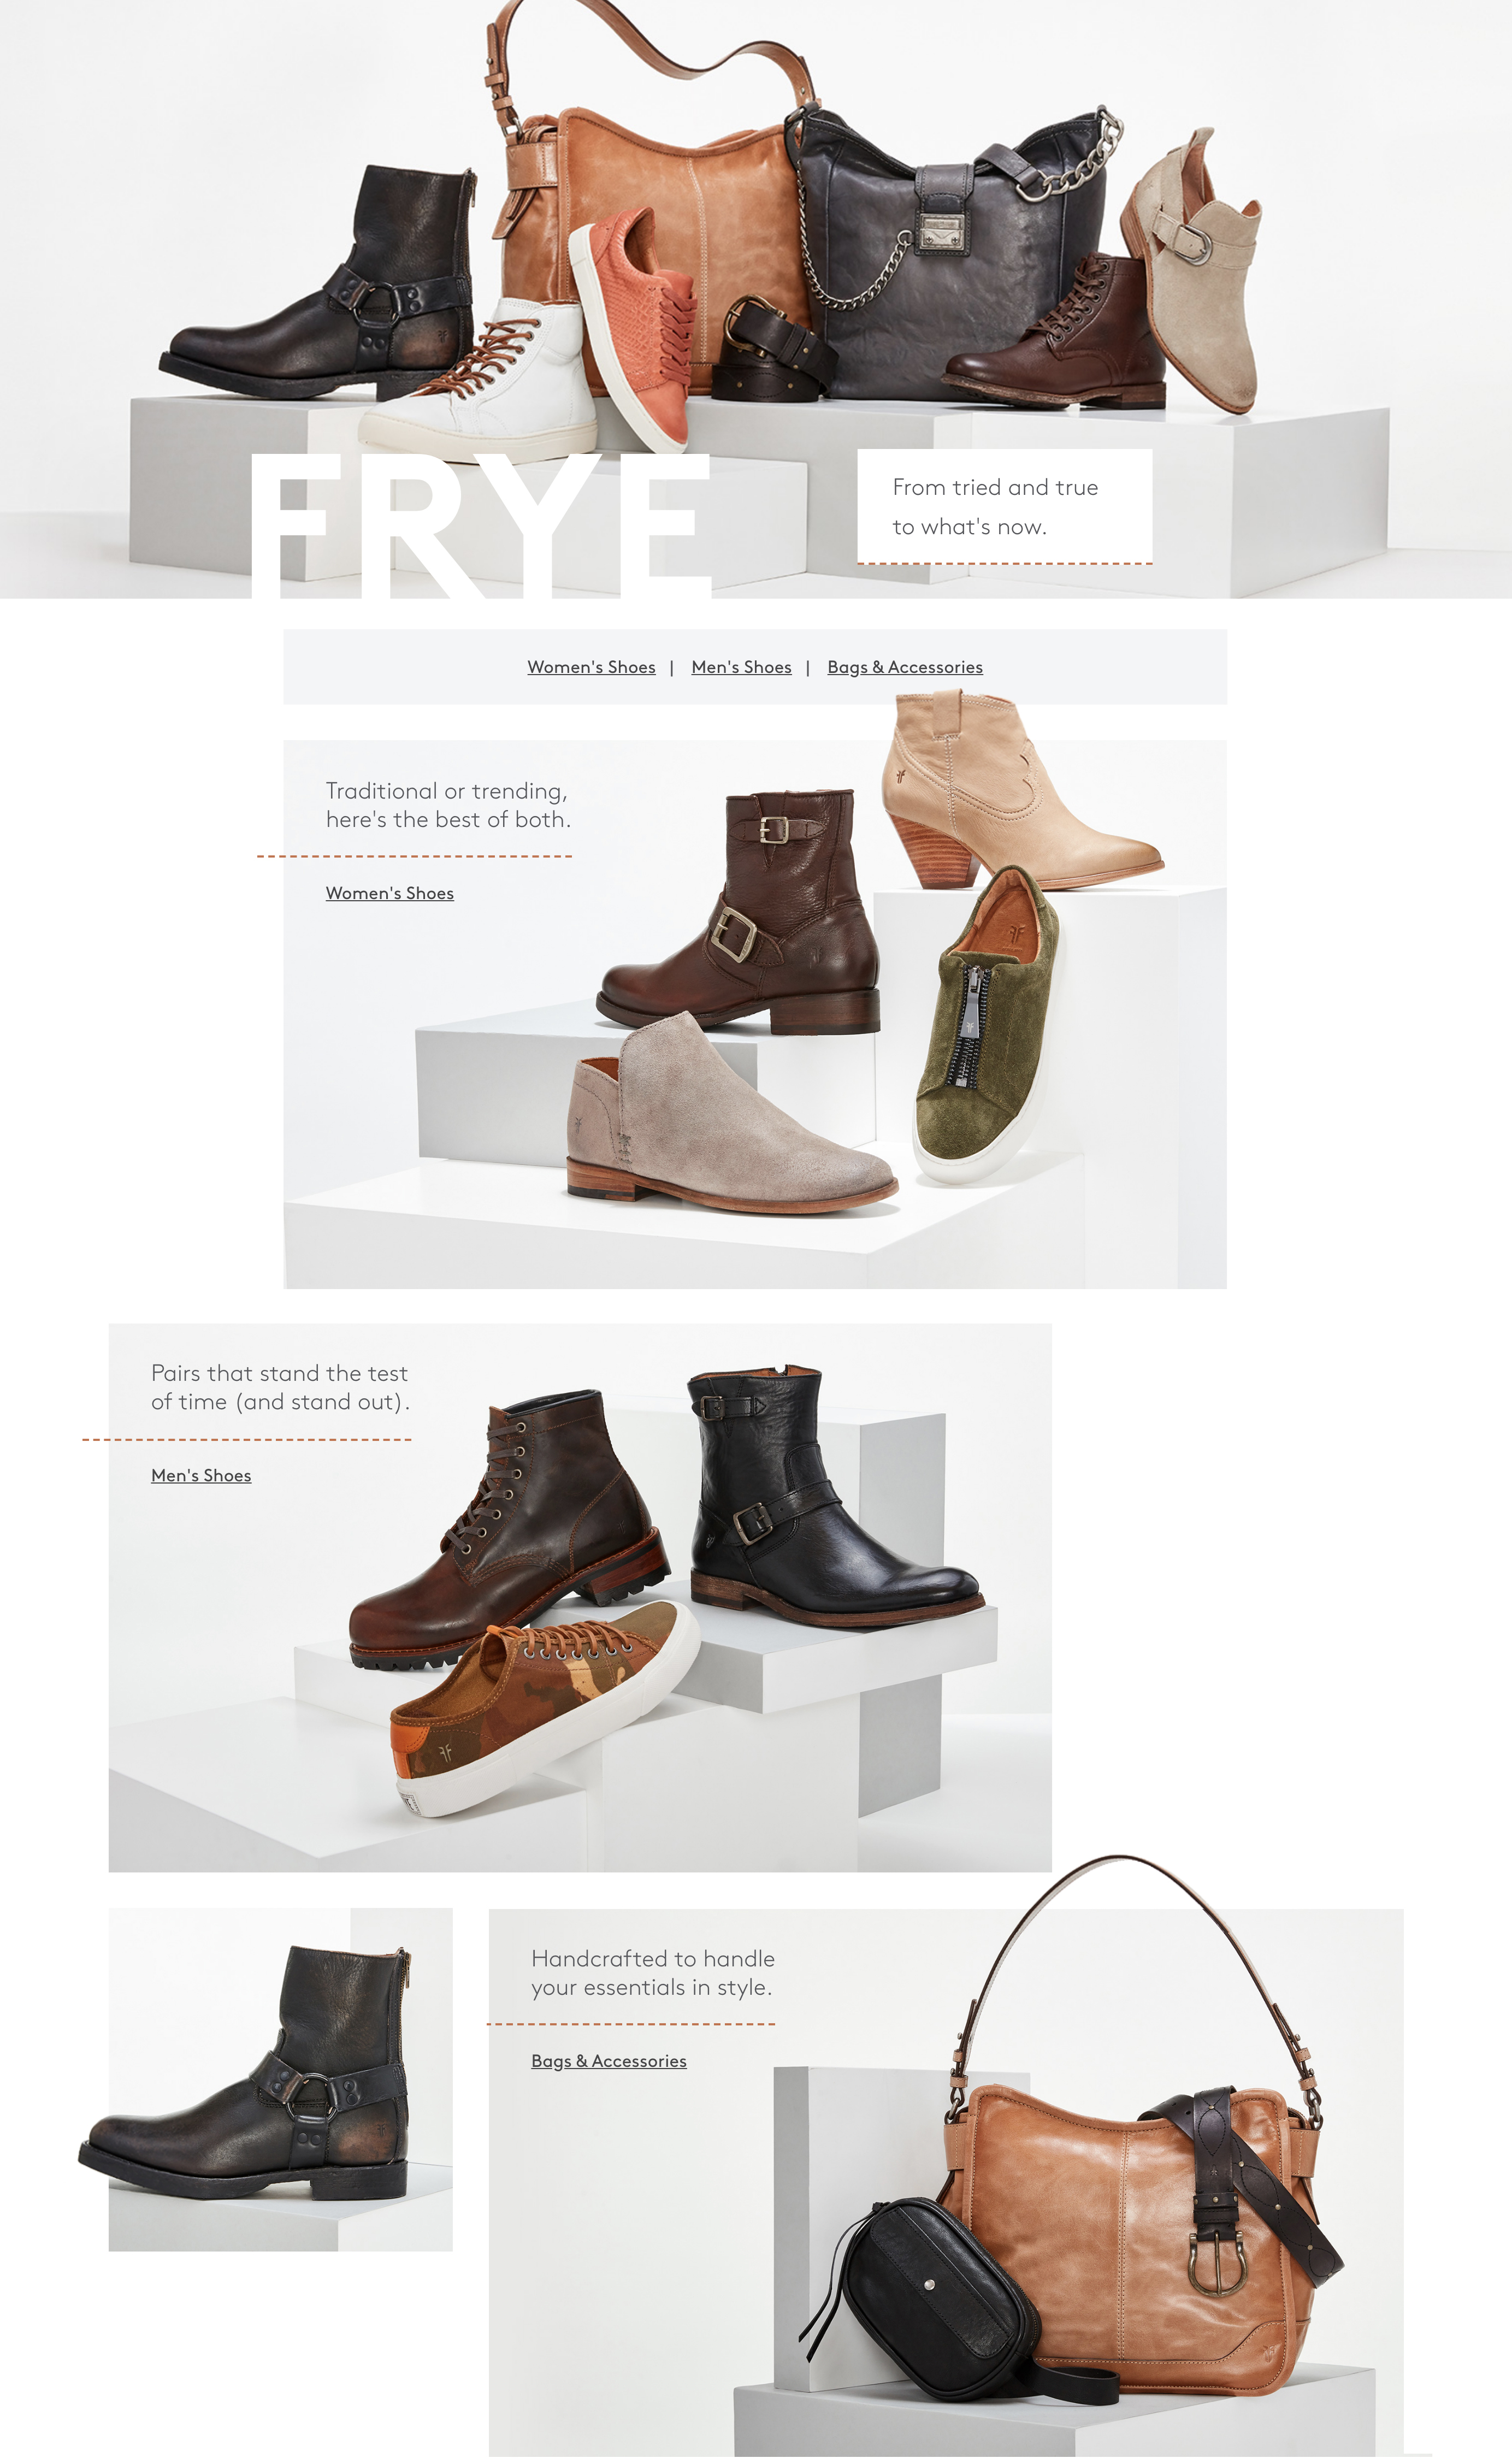 Frye_campaign